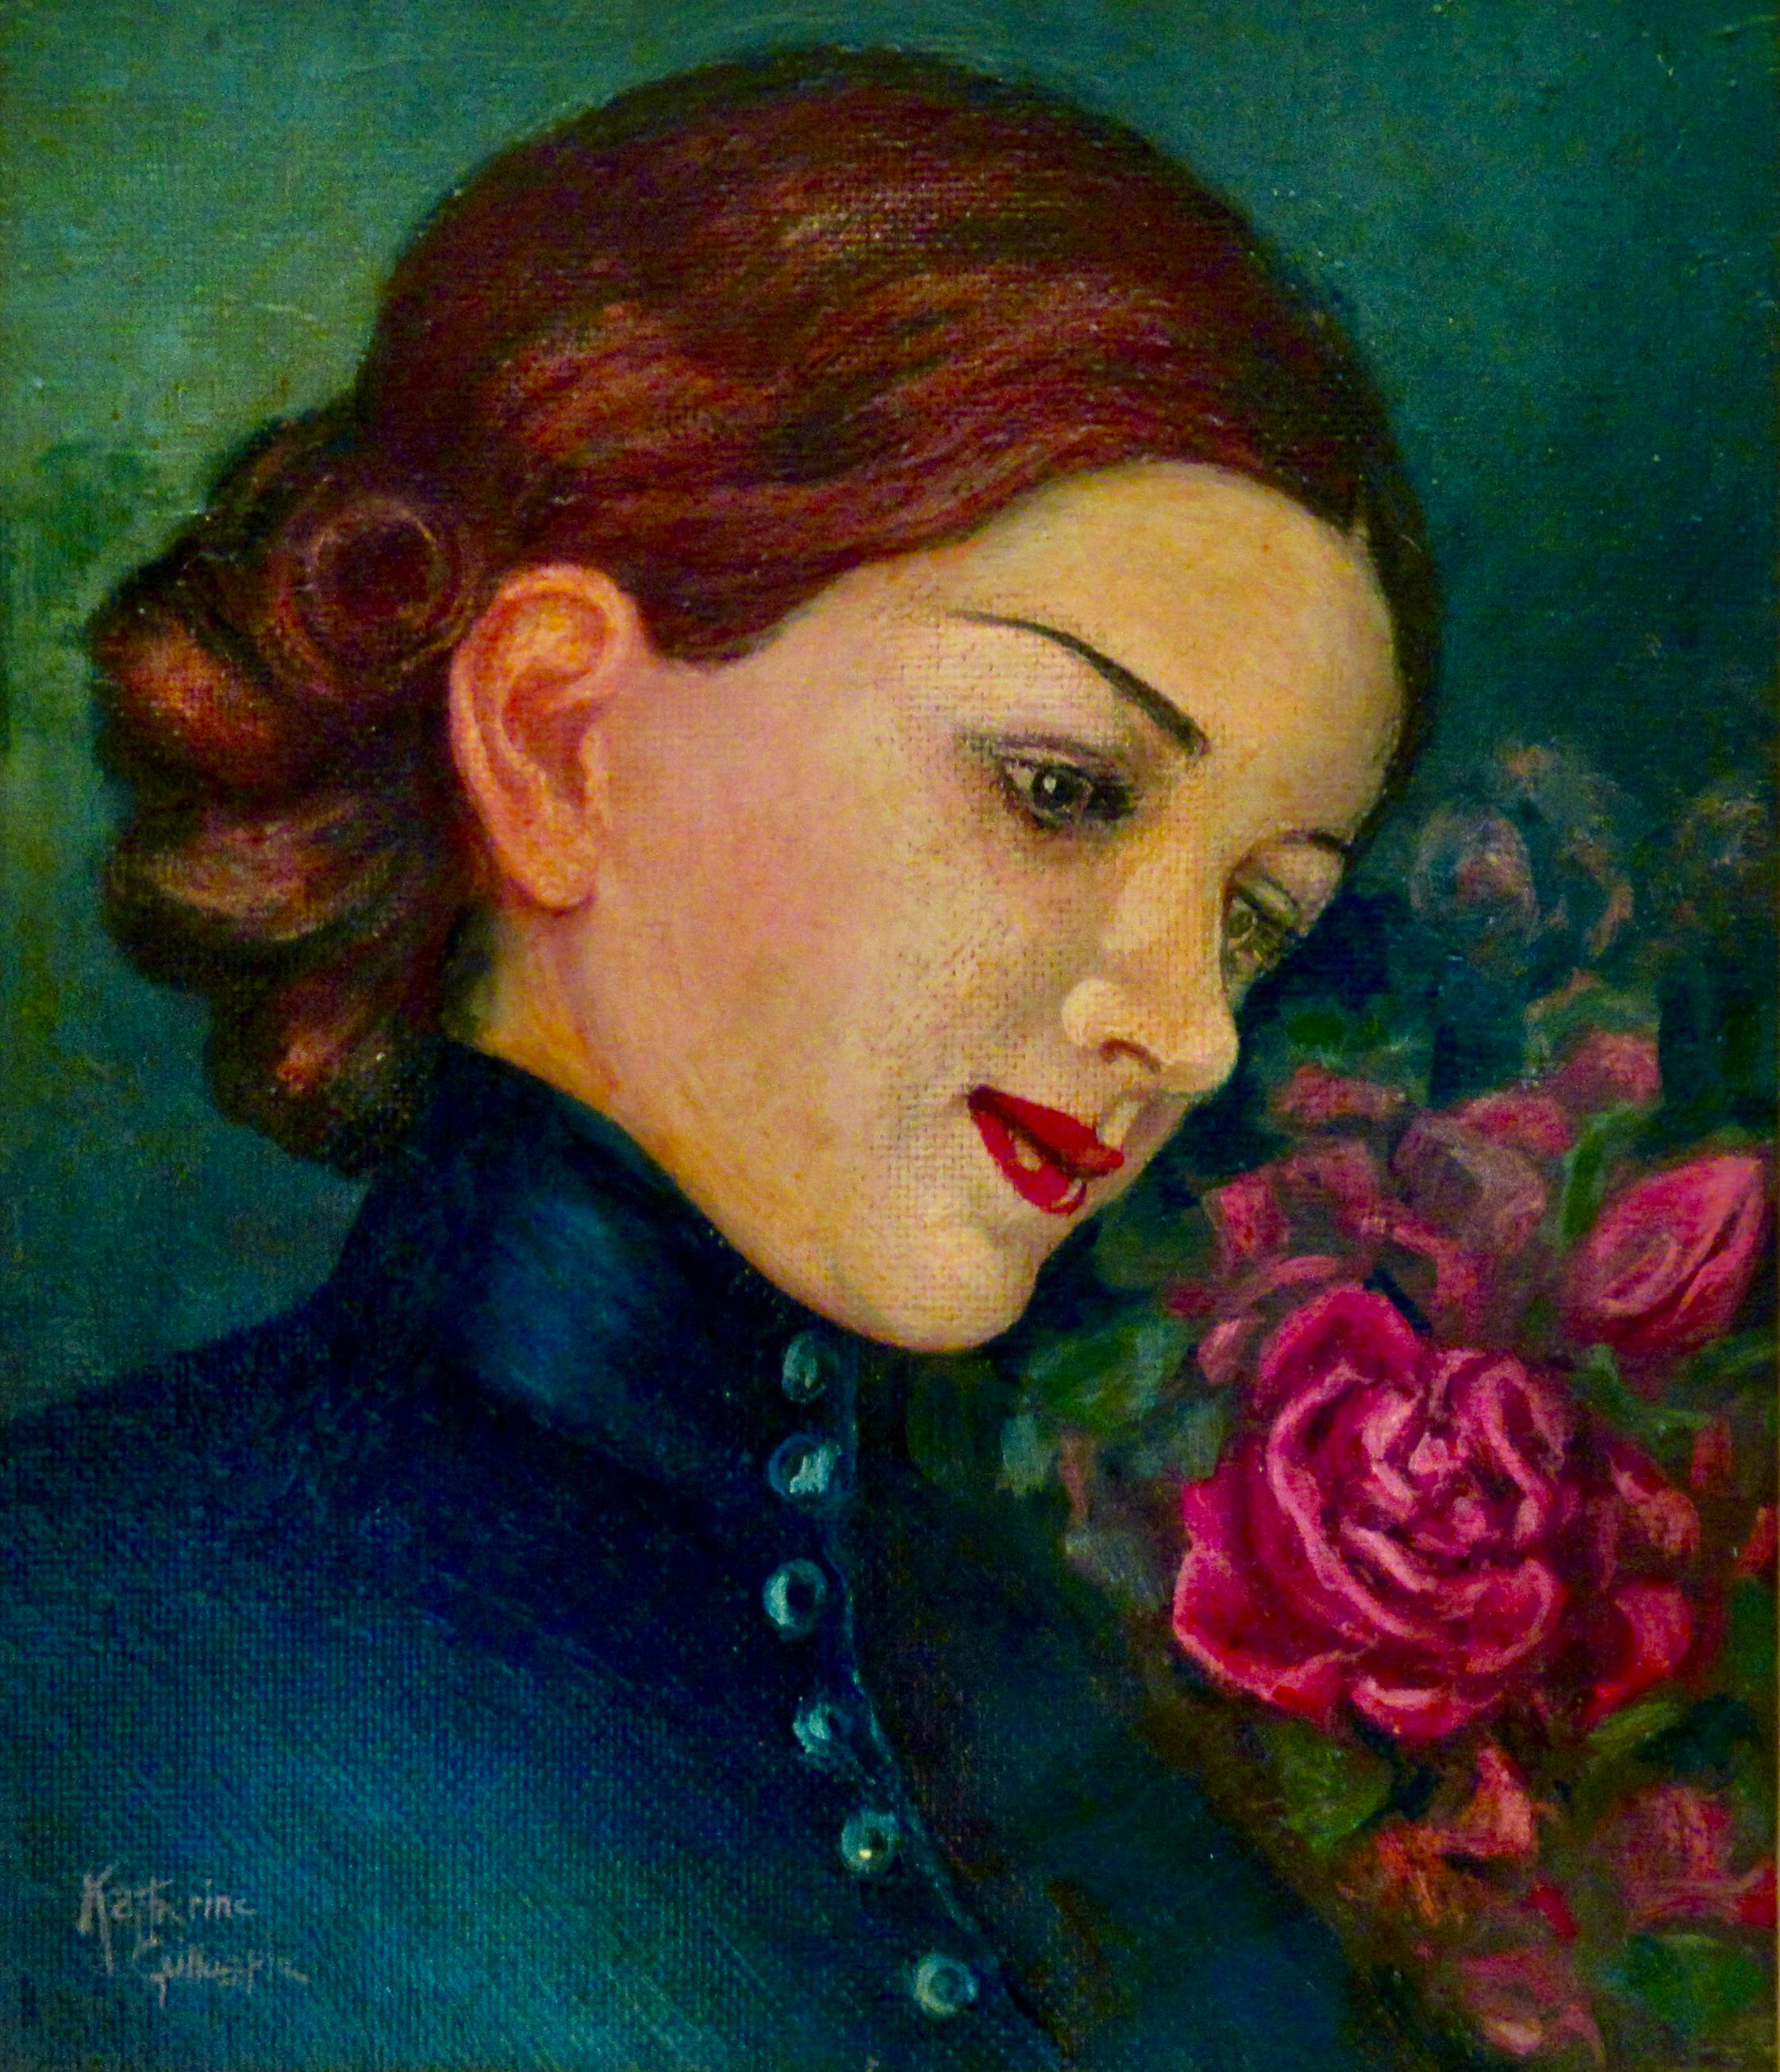 Woman with Roses - Painting by Katherine gillespie